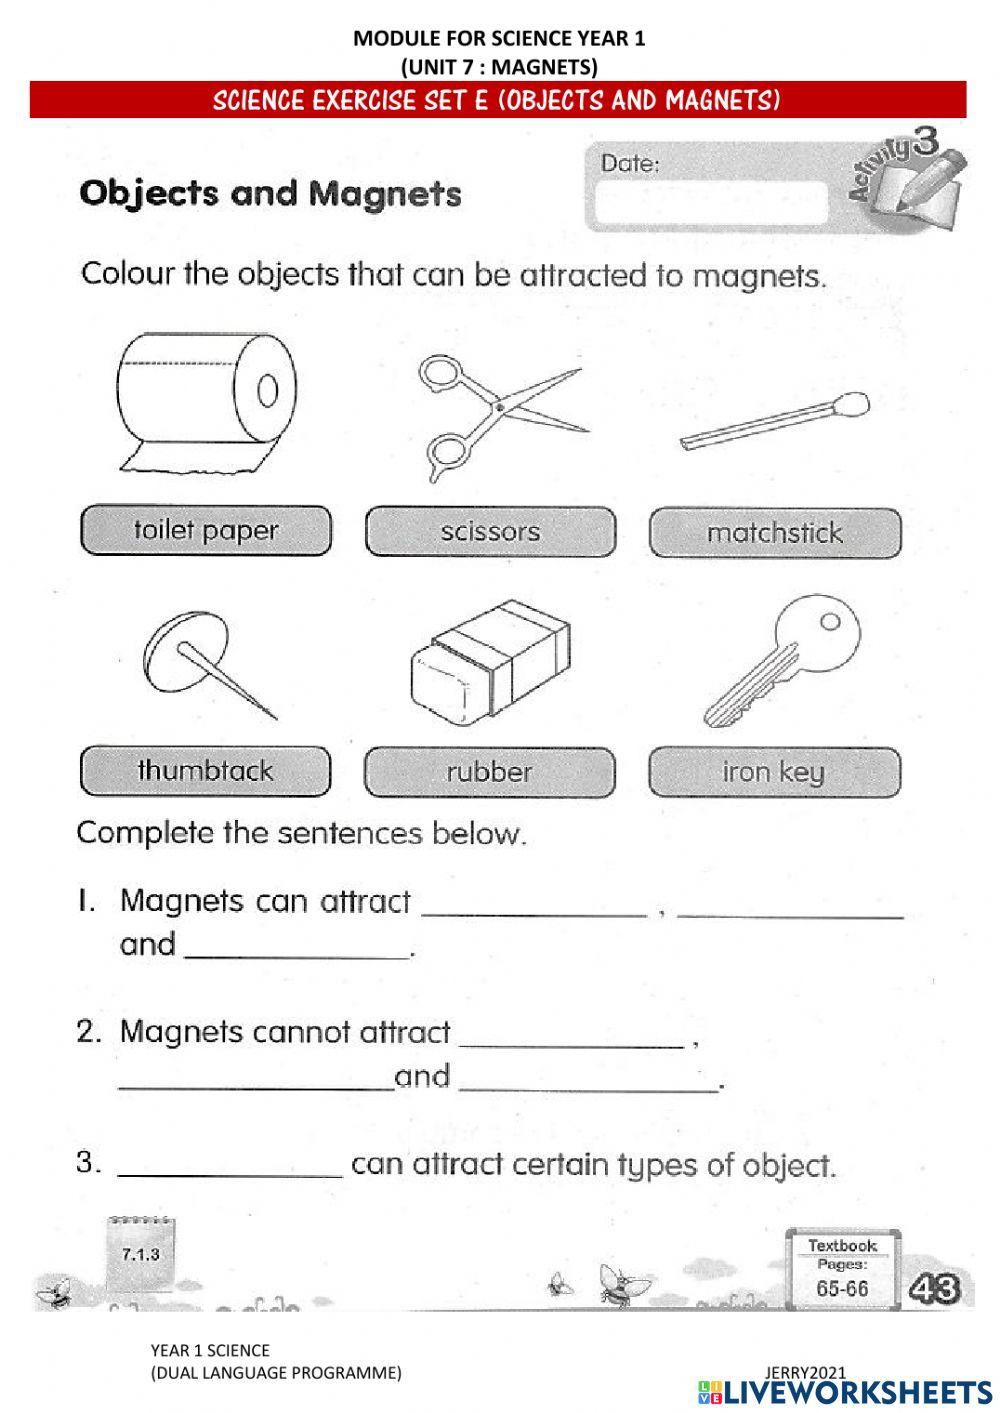 Science Year 1 : Uses Of Magnet